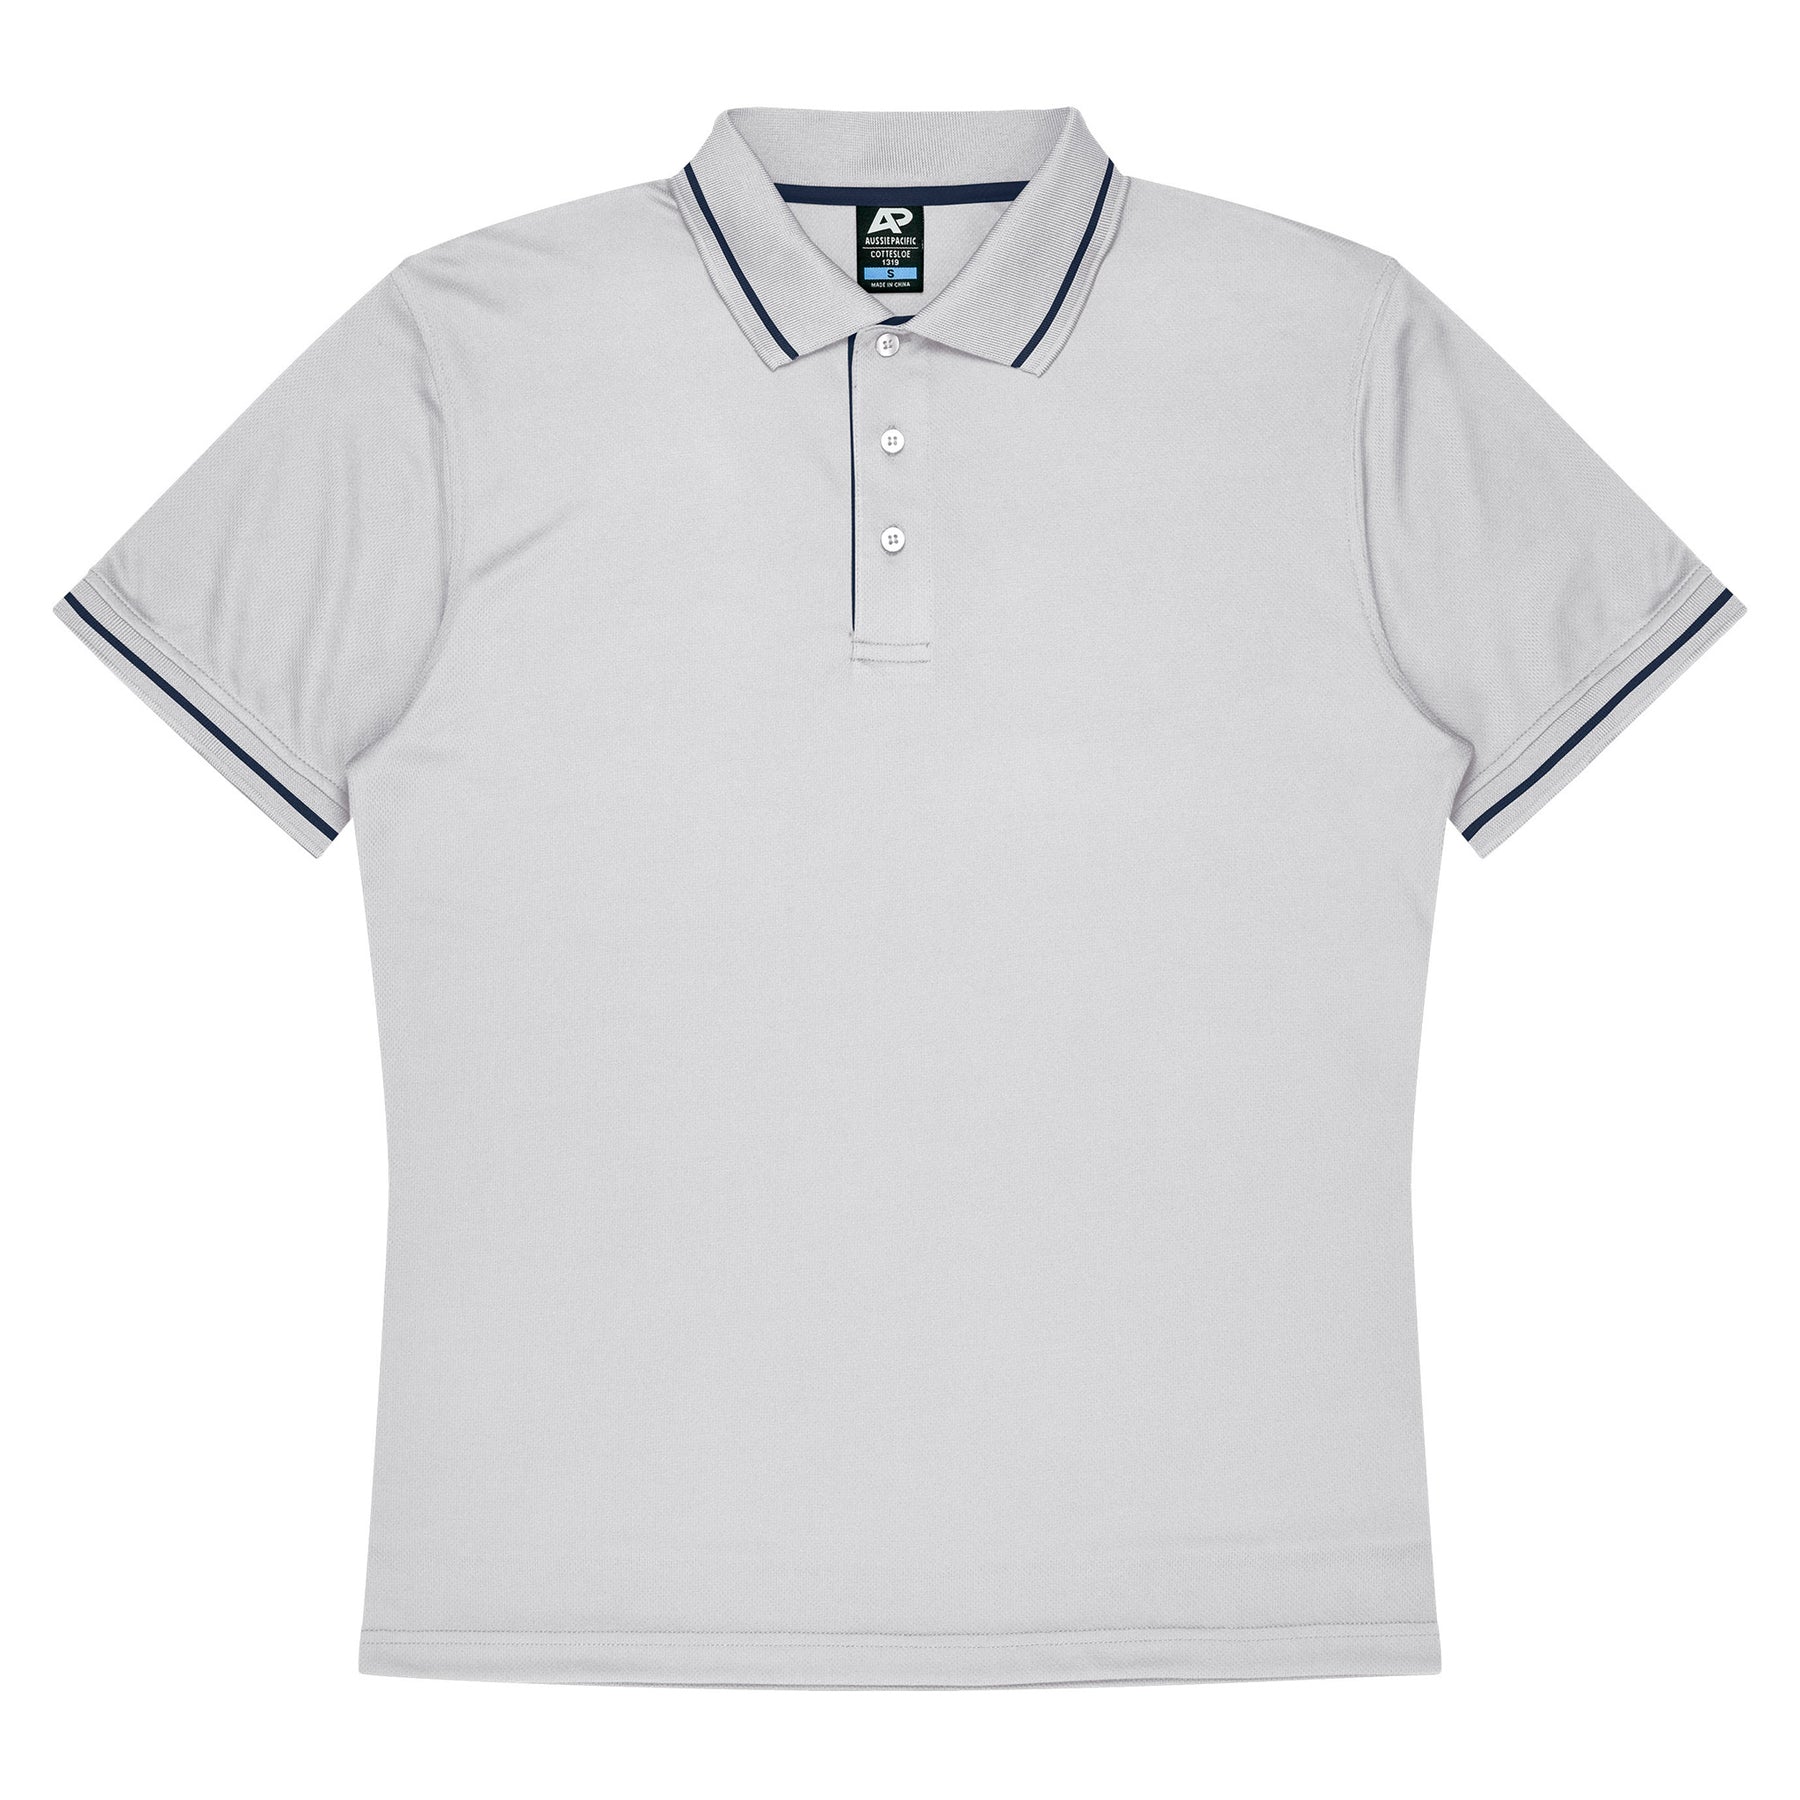 aussie pacific cottesloe mens polo in white black